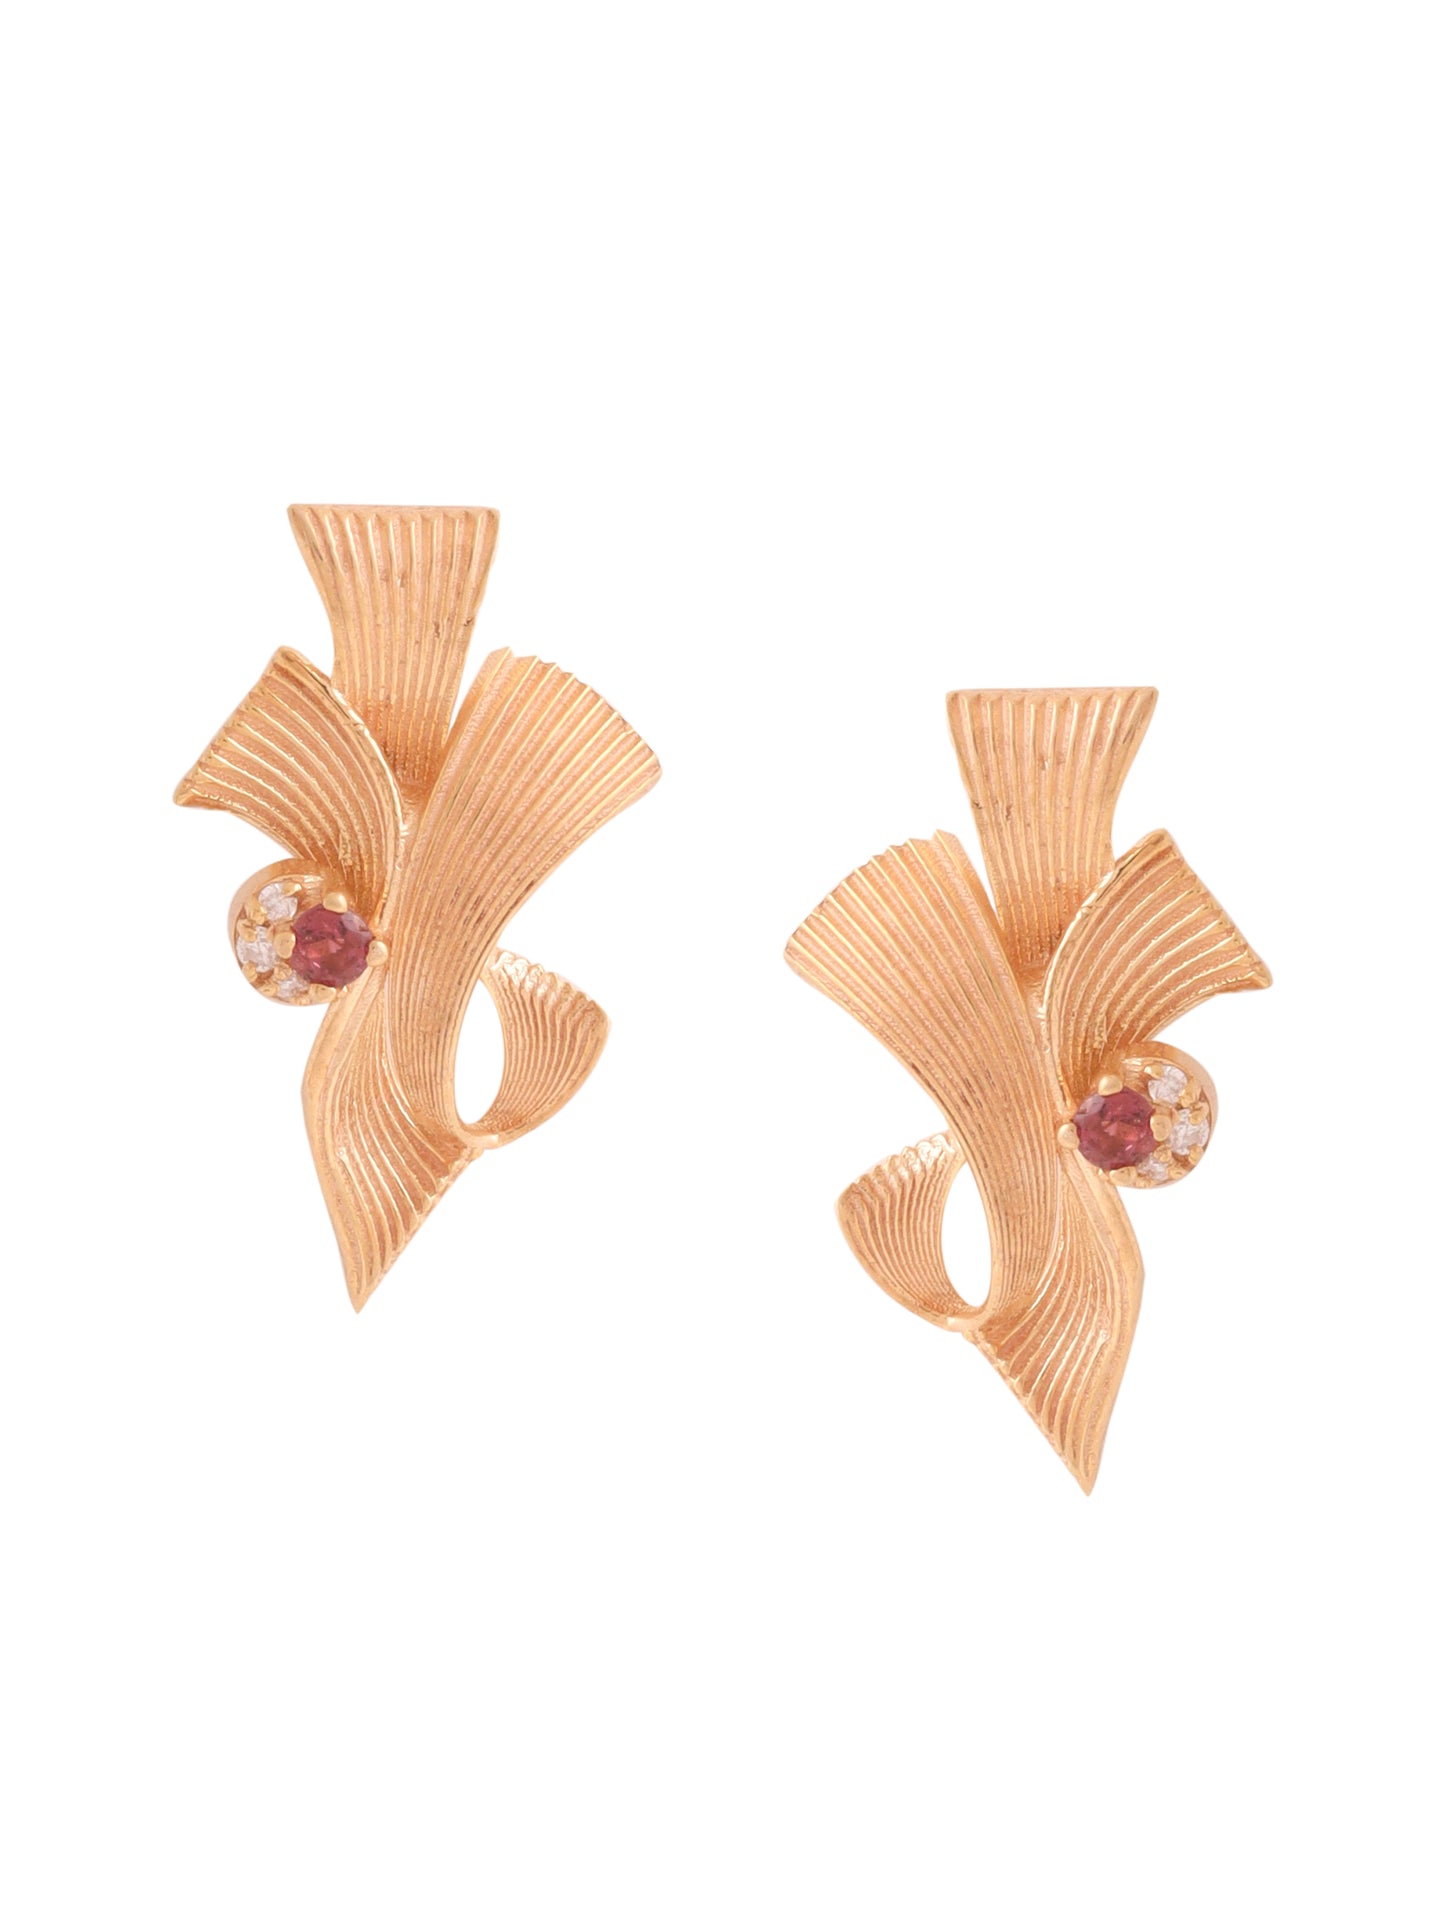 Kicky and Perky 925 Sterling silver Rose Gold Precious Ruby & Mossanite Folded Frills Earring for Women